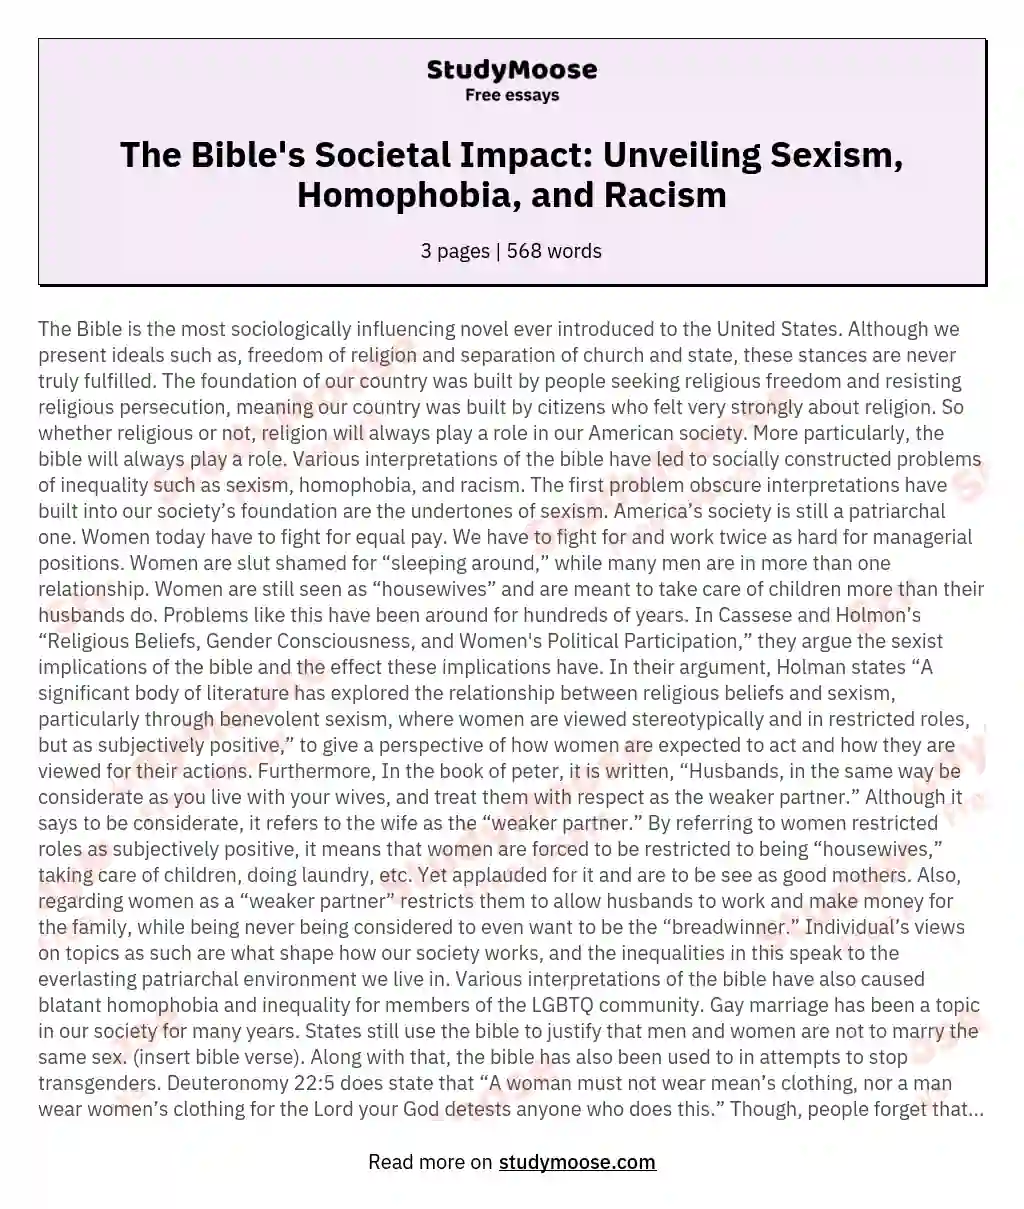 The Bible's Societal Impact: Unveiling Sexism, Homophobia, and Racism essay